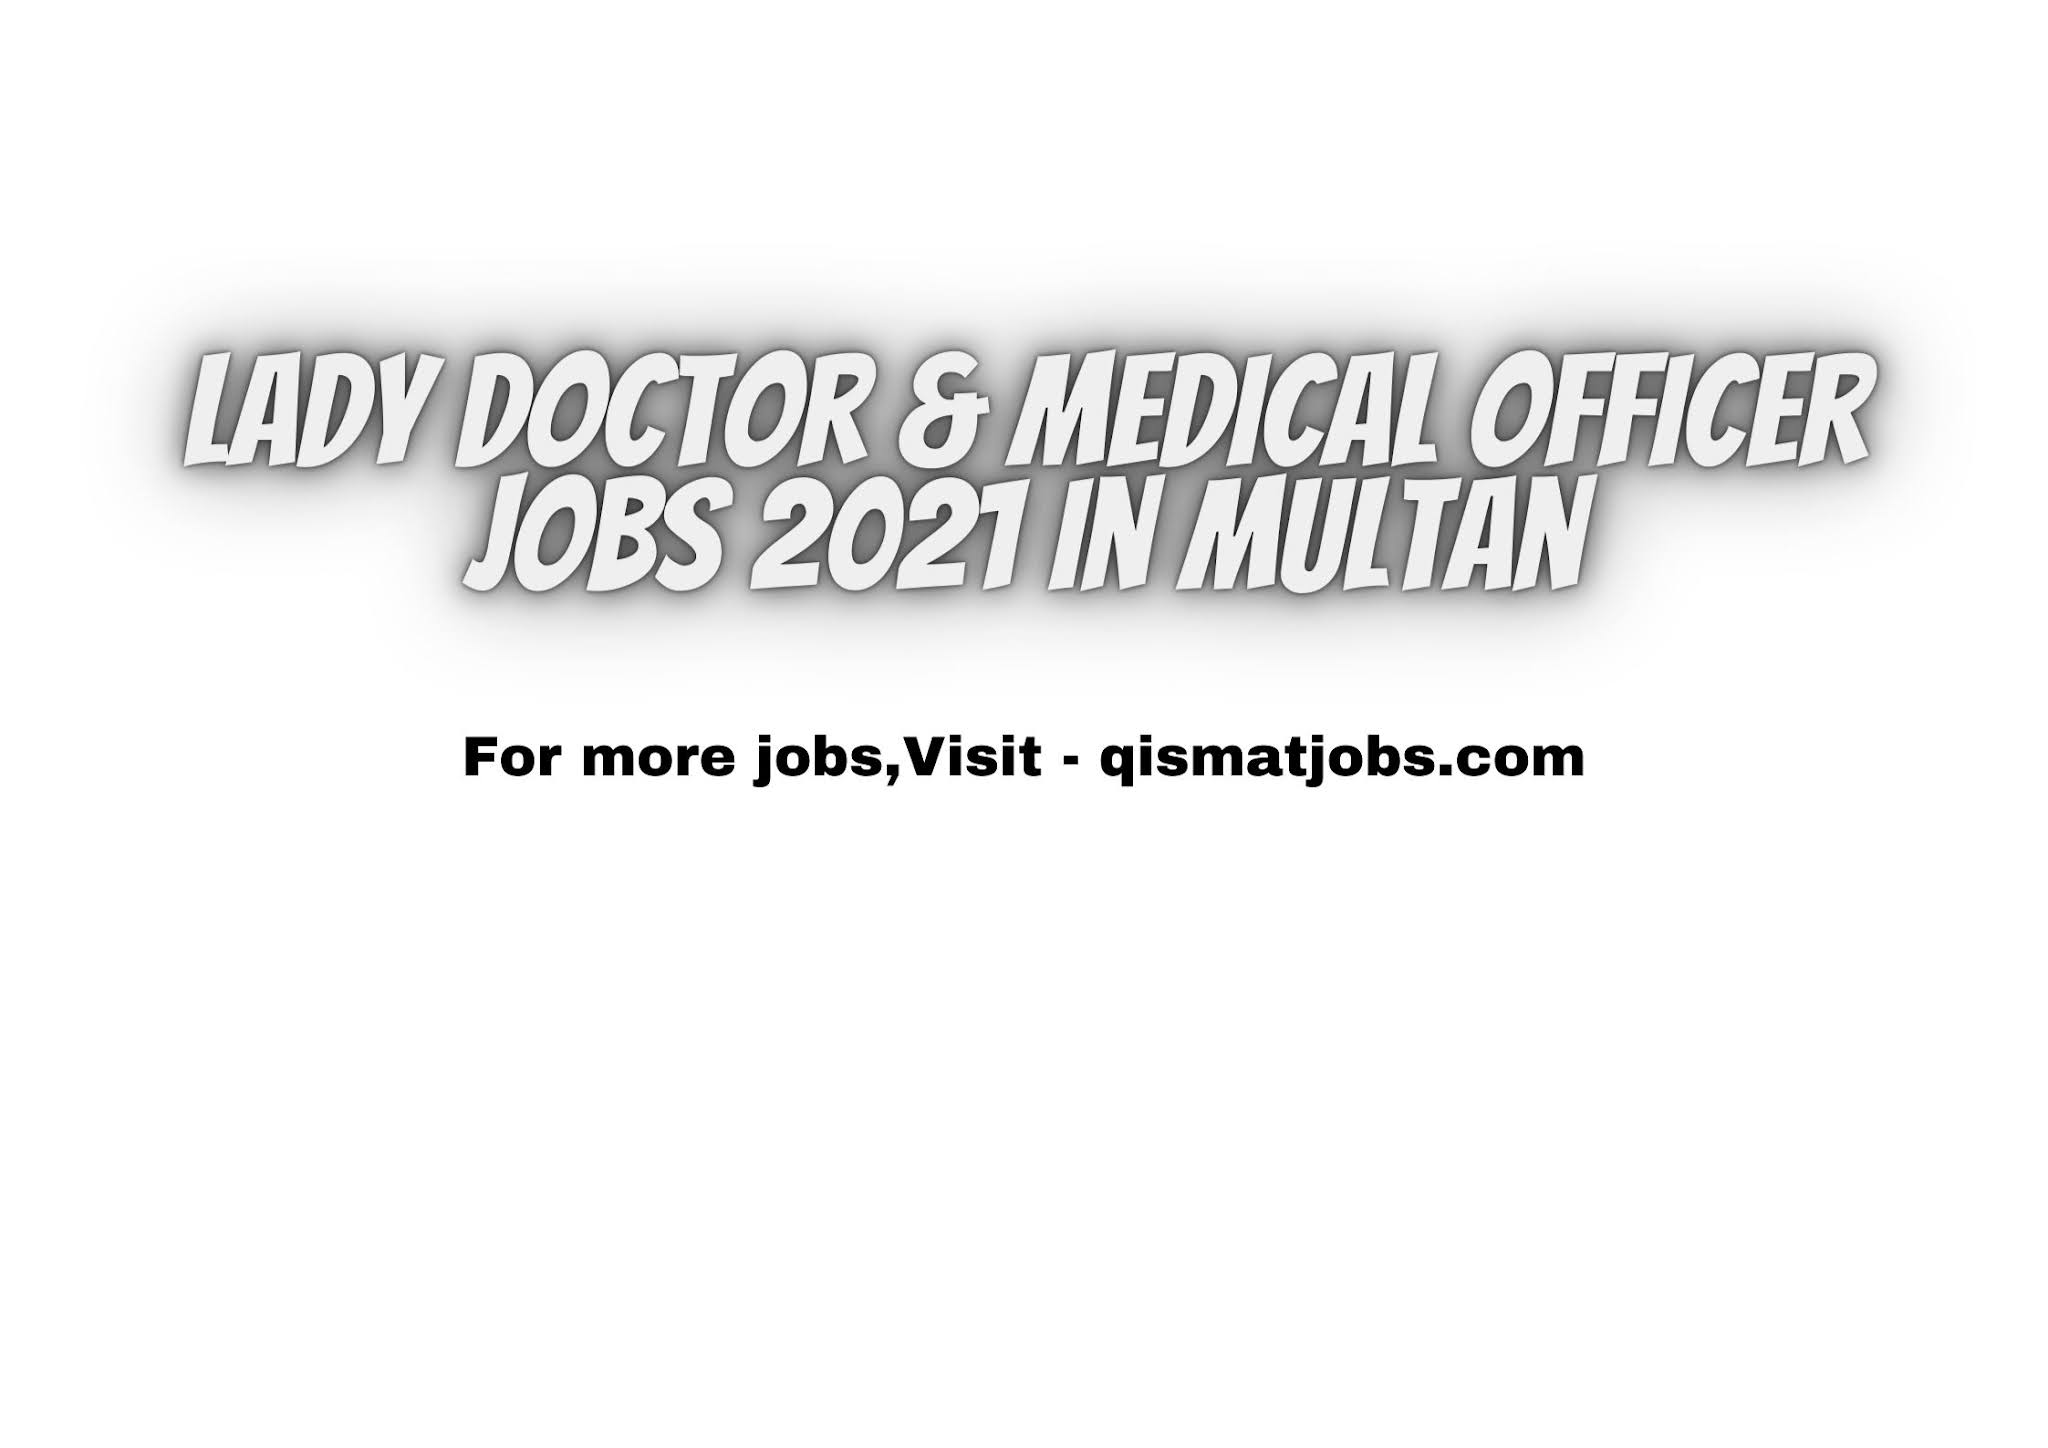 Lady Doctor & Medical Officer Latest Jobs 2021 | Khanewal, Pakistan